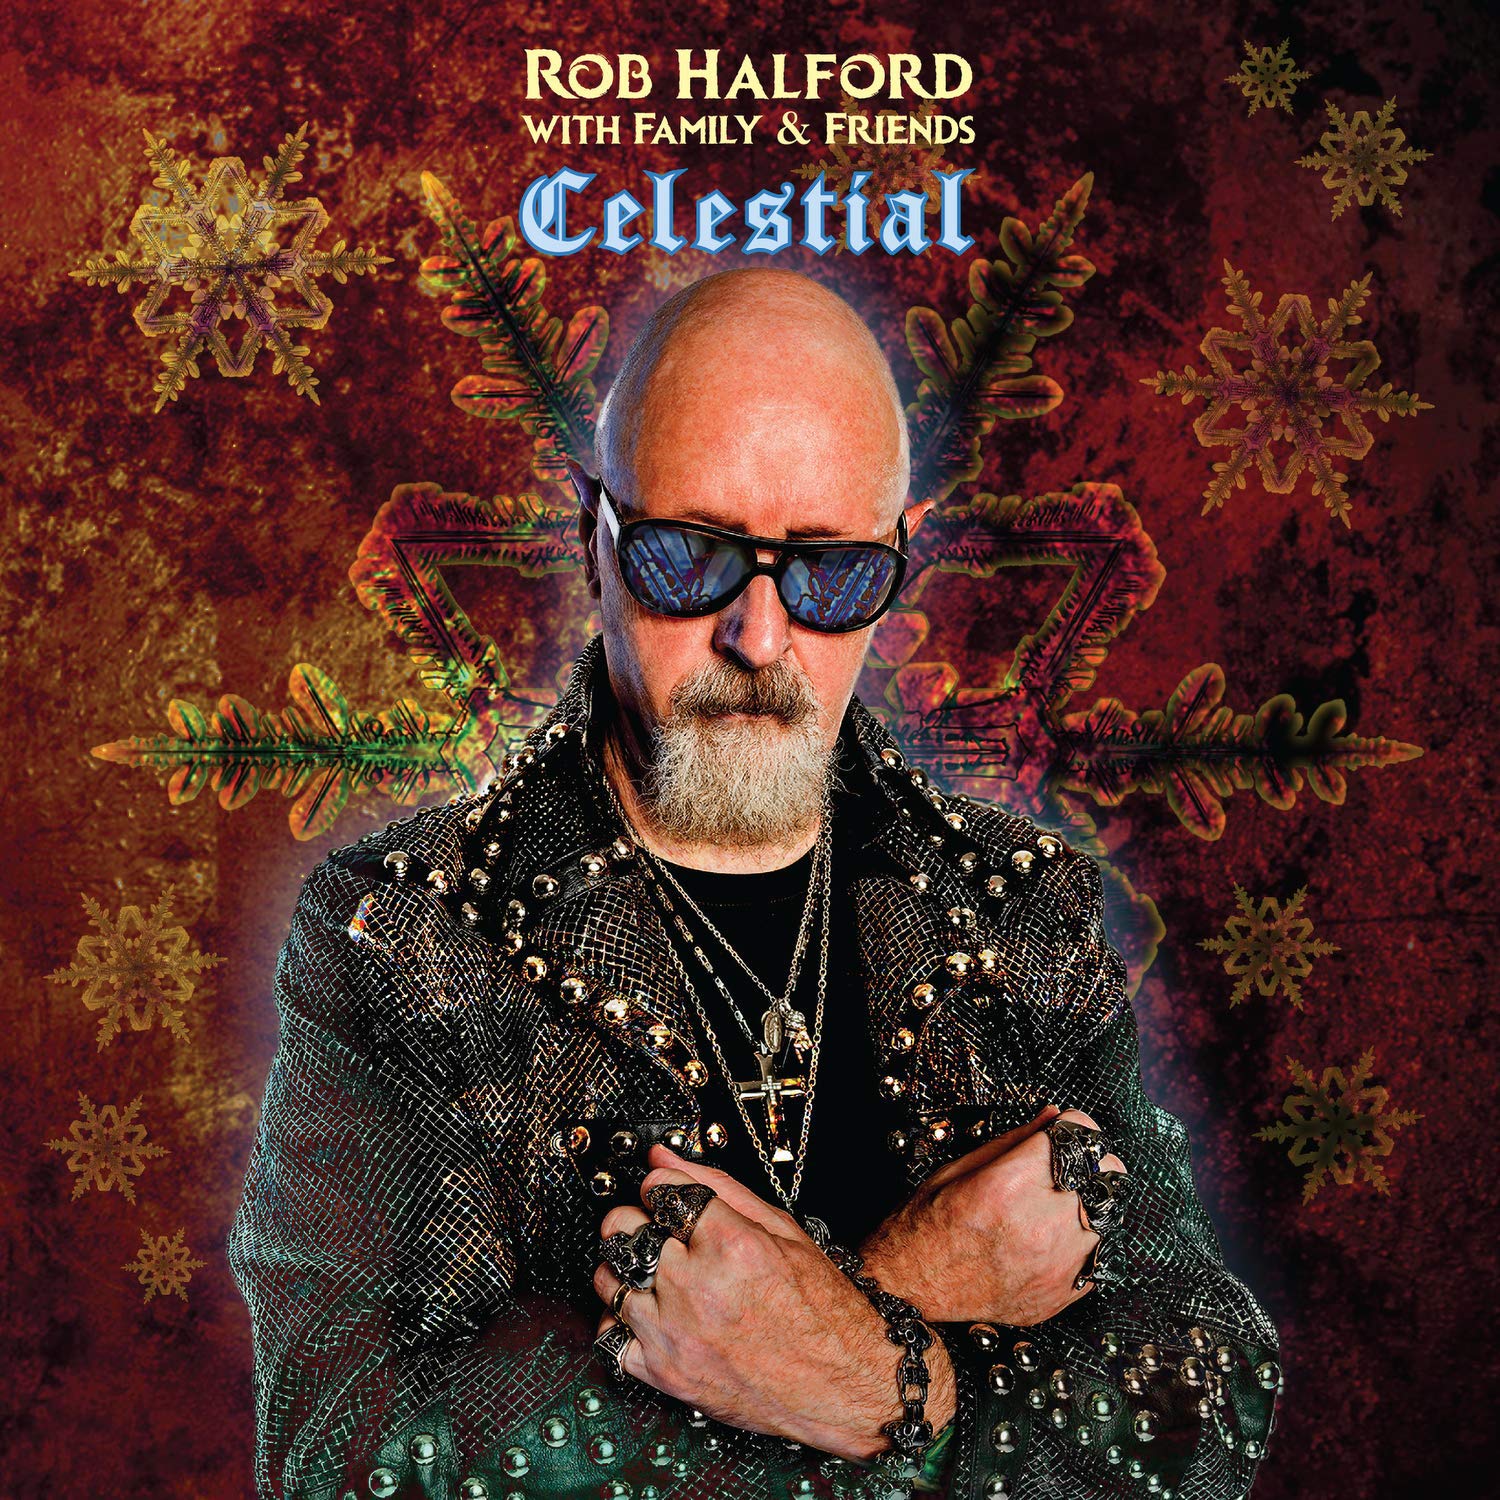 CELESTIAL-ROB WITH FAMILY HALFORD & FRIENDS